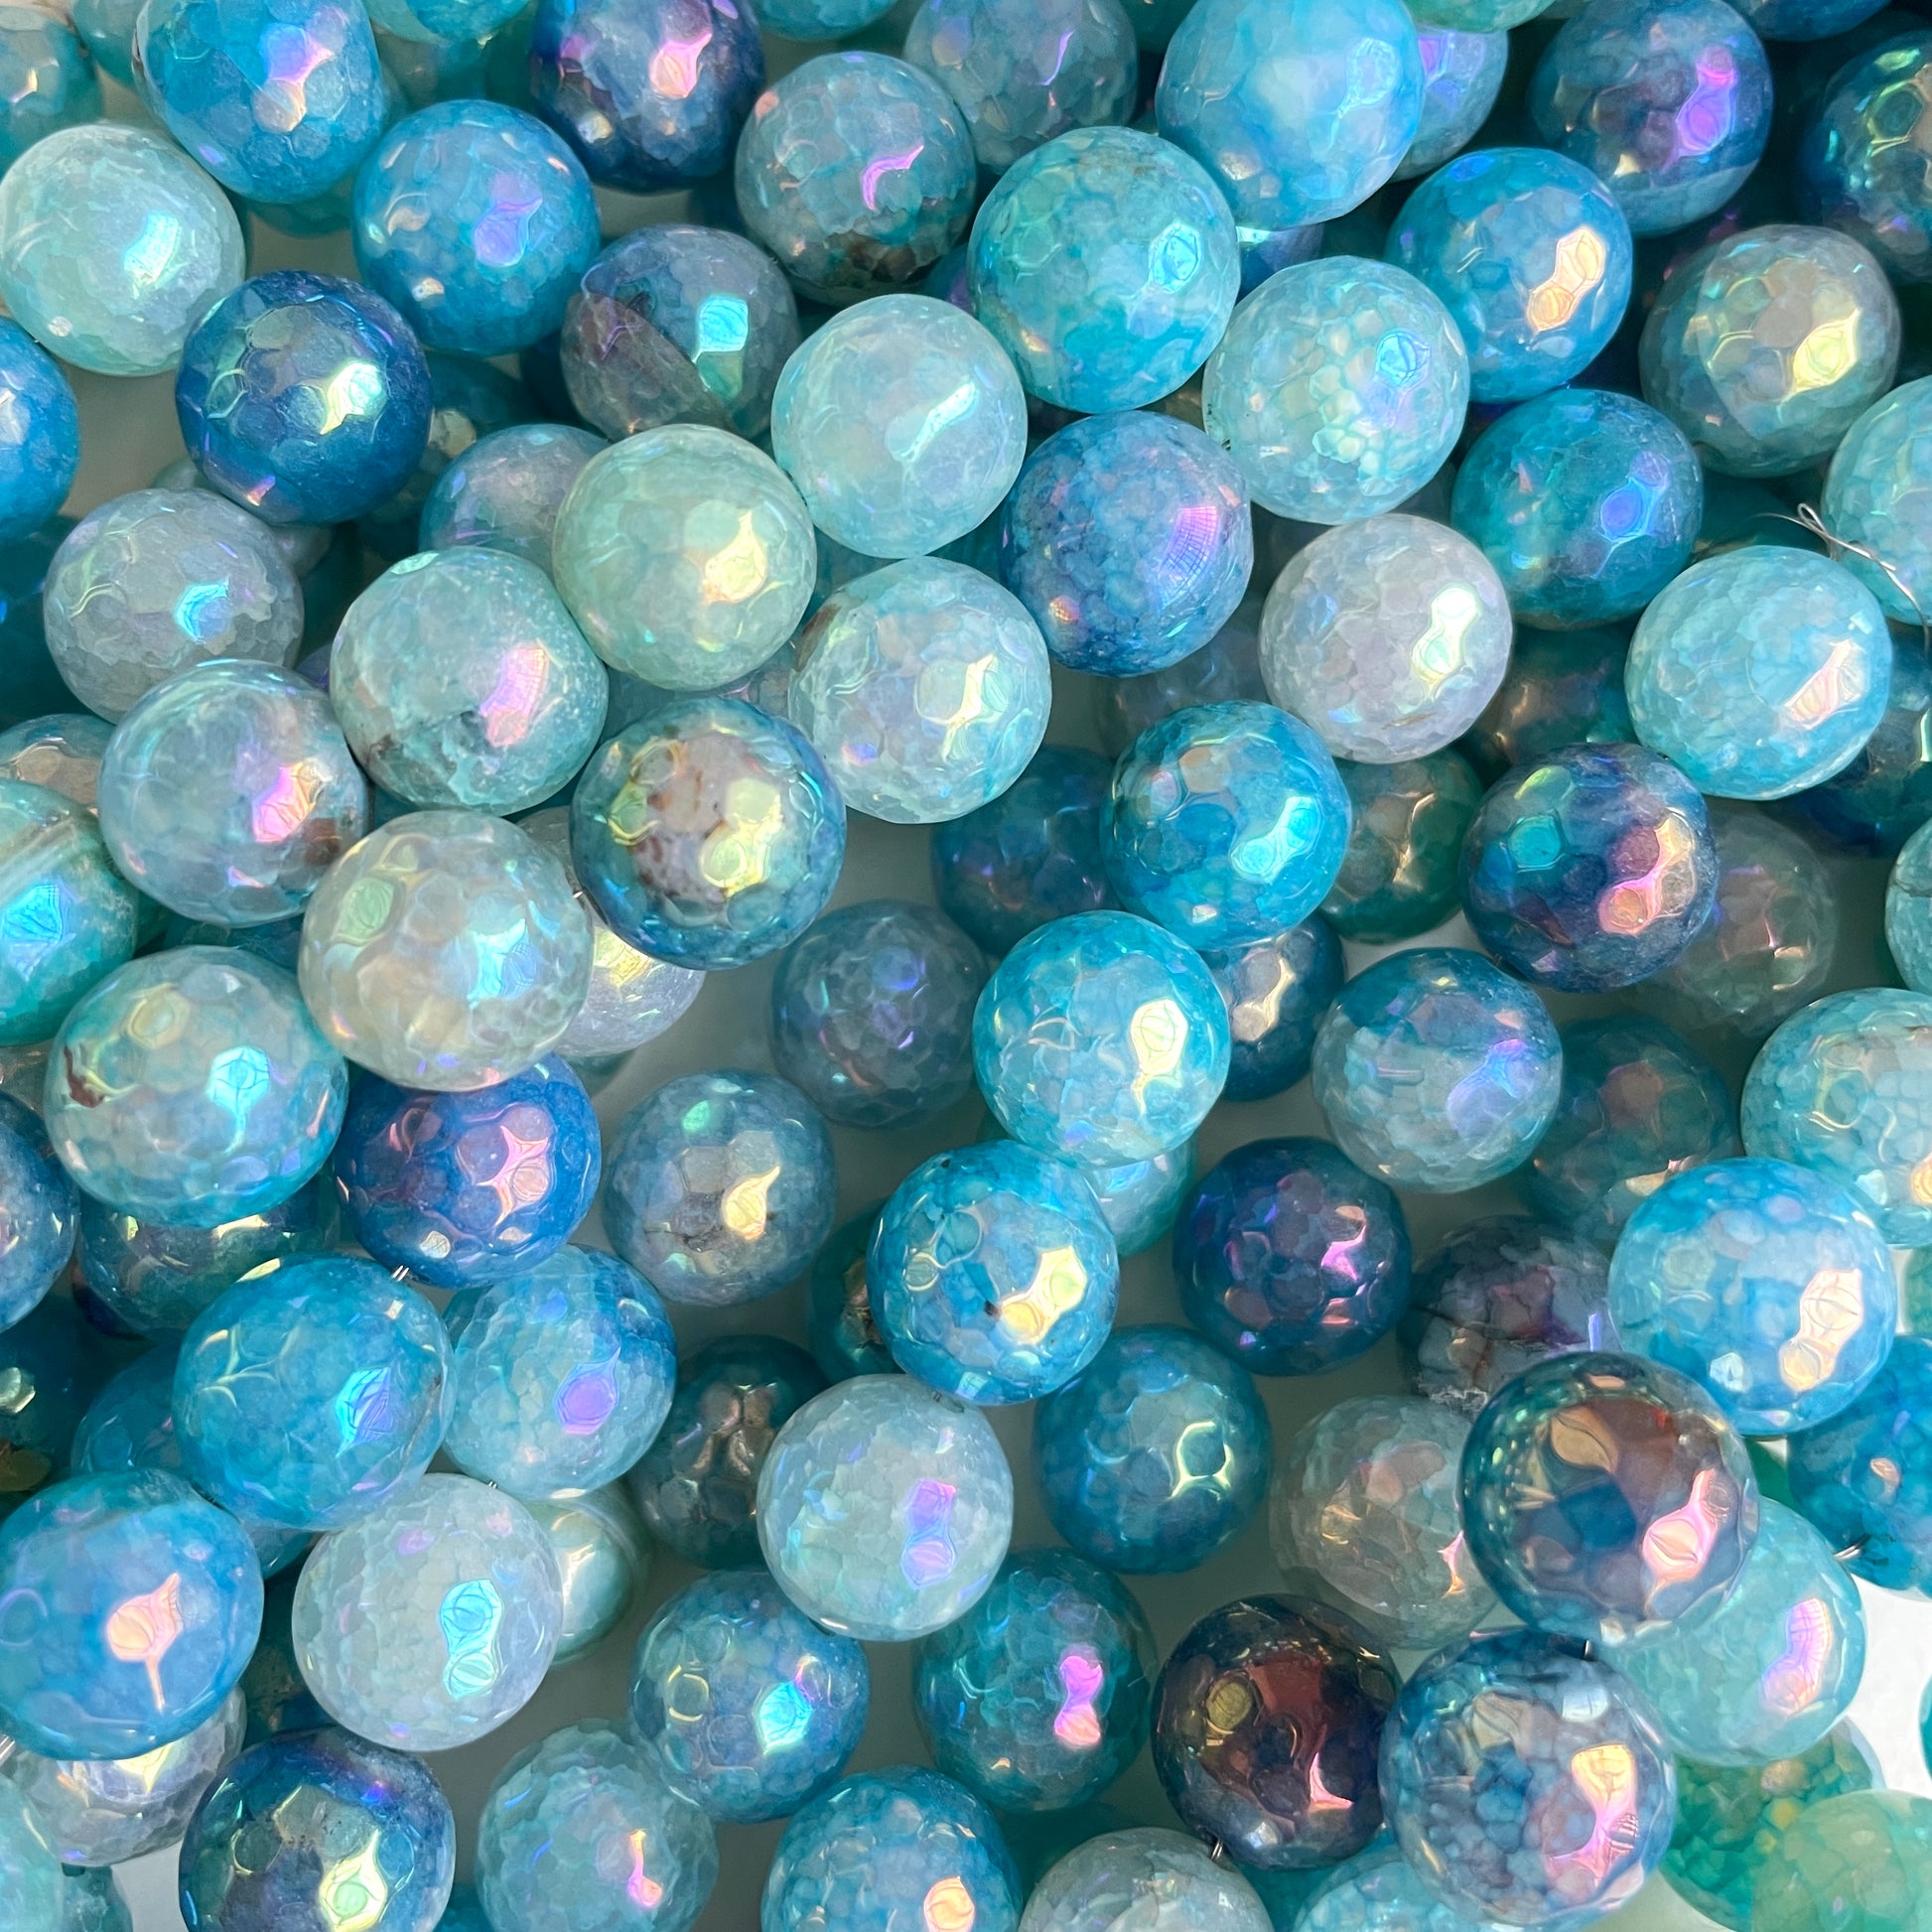 2 Strands/lot 10mm Electroplated AB Turquoise Blue Agate Faceted Stone Beads